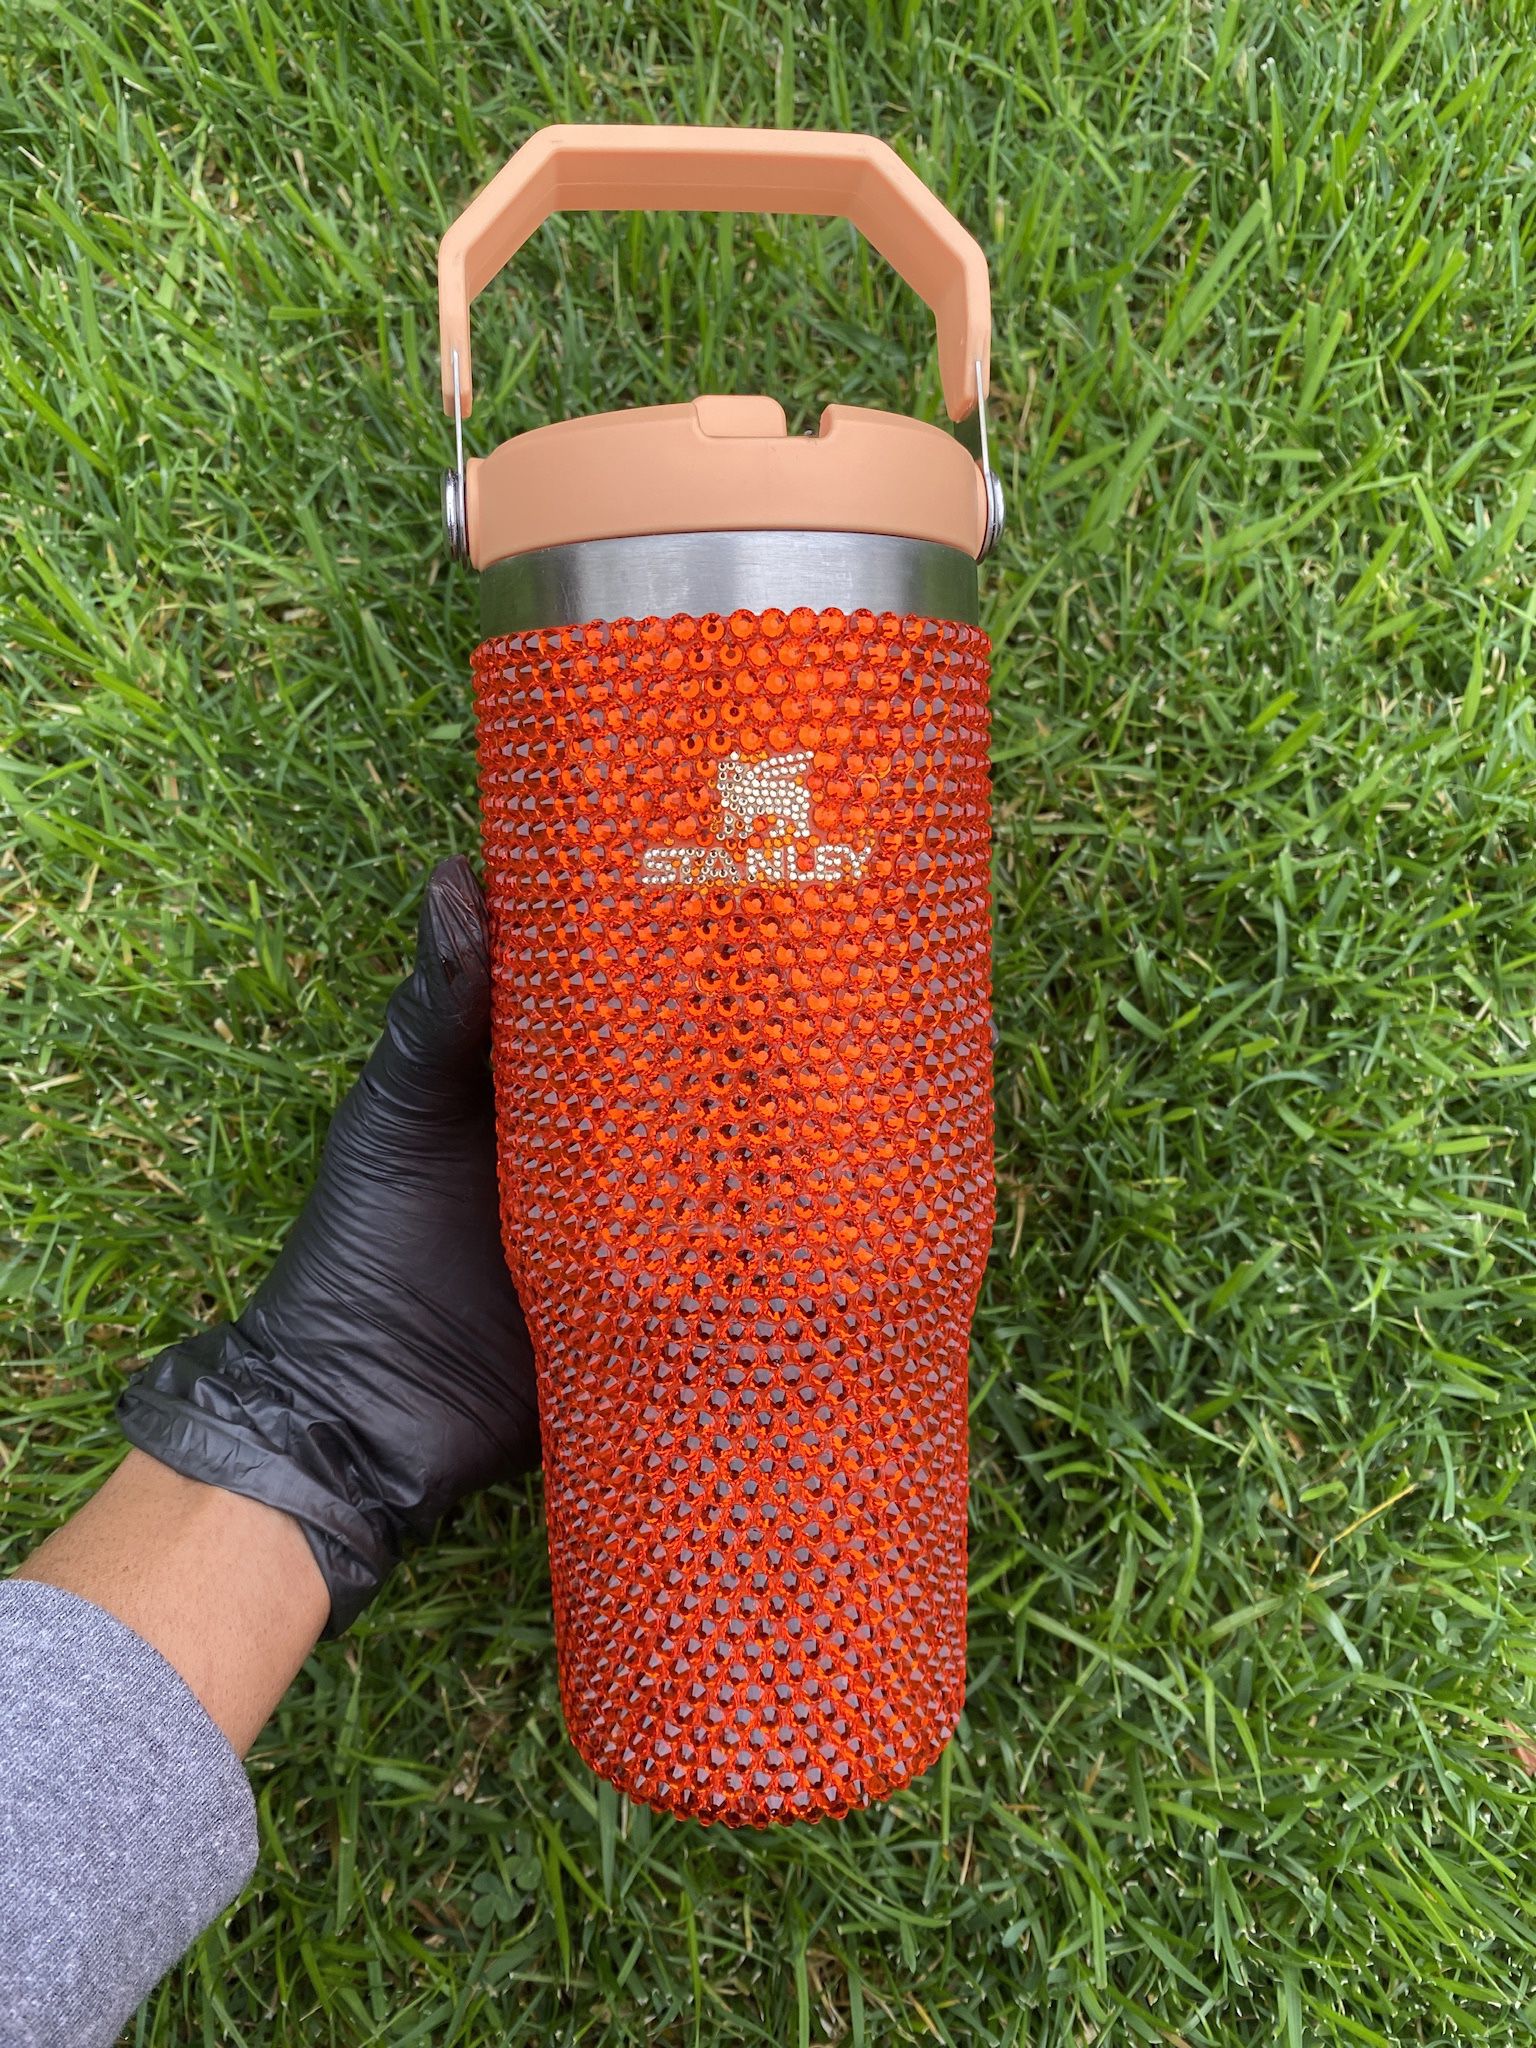 Stanley Tumbler for Sale in Rialto, CA - OfferUp